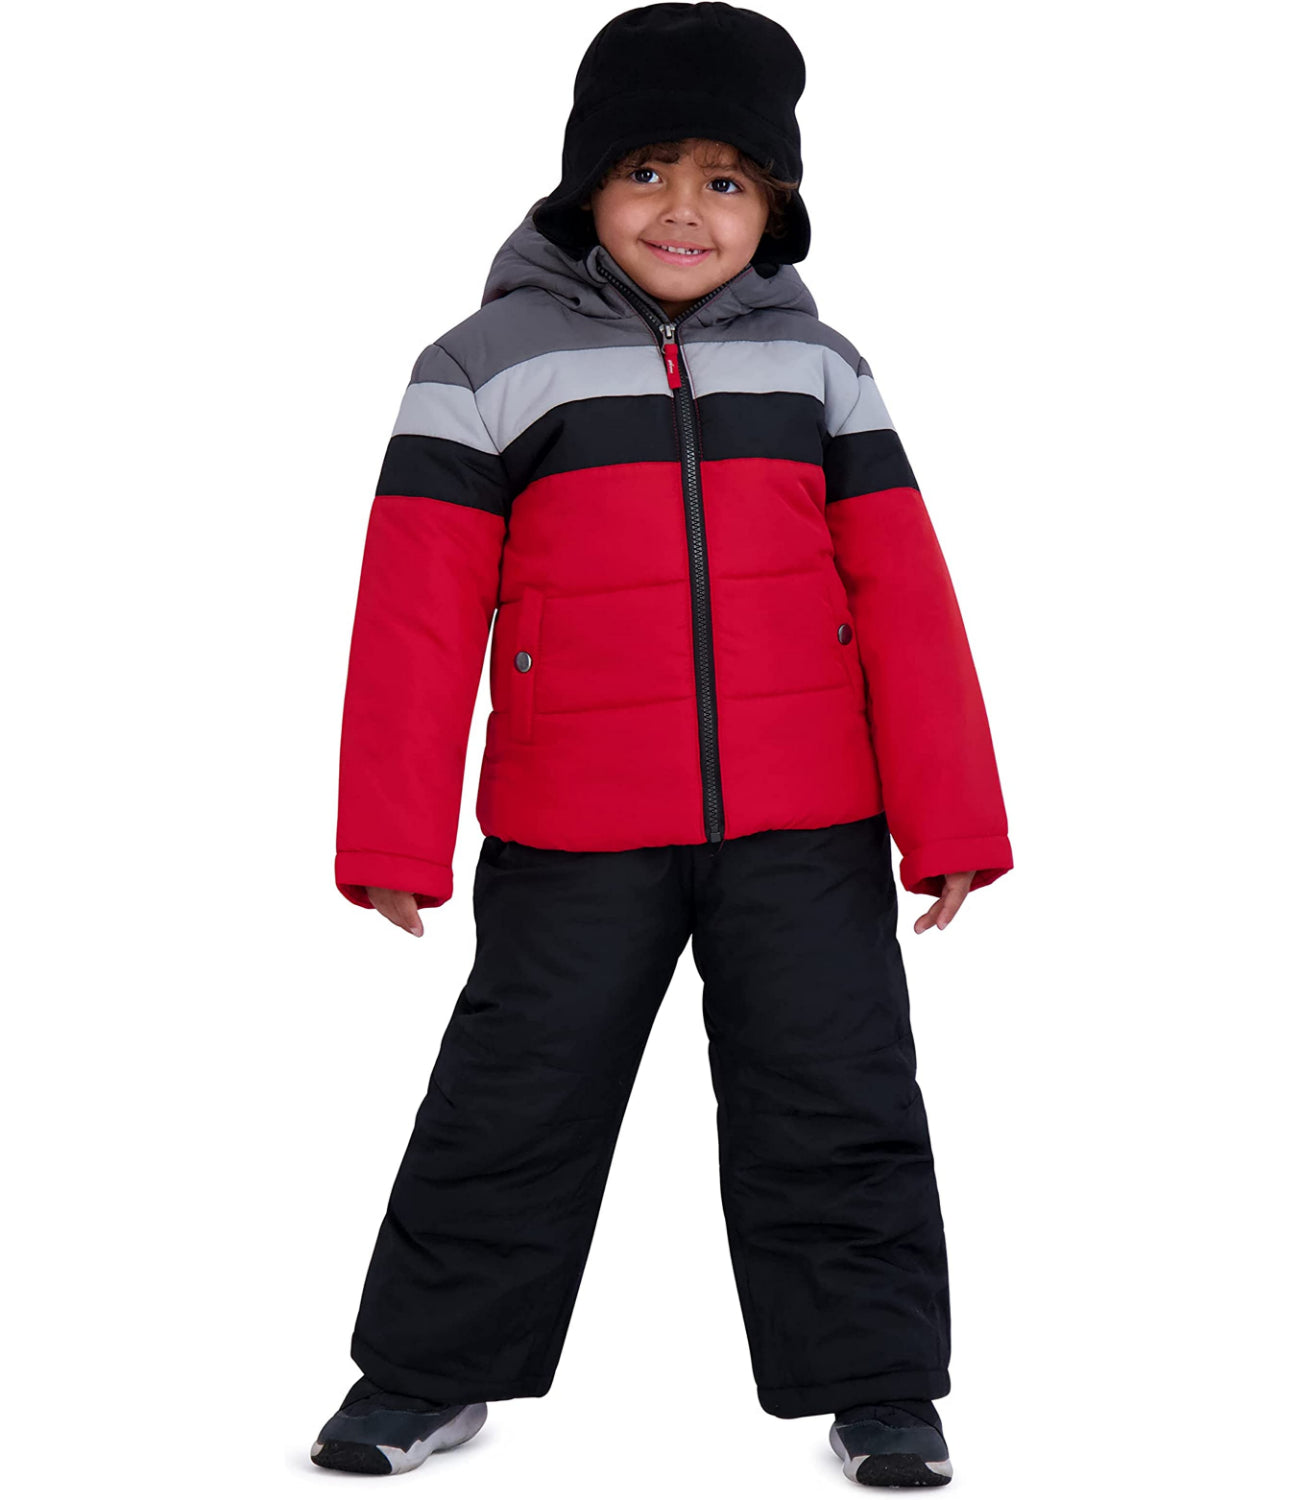 Rothschild Boys 4-7 Colorblock 2-Piece Snowsuit with Matching Hat